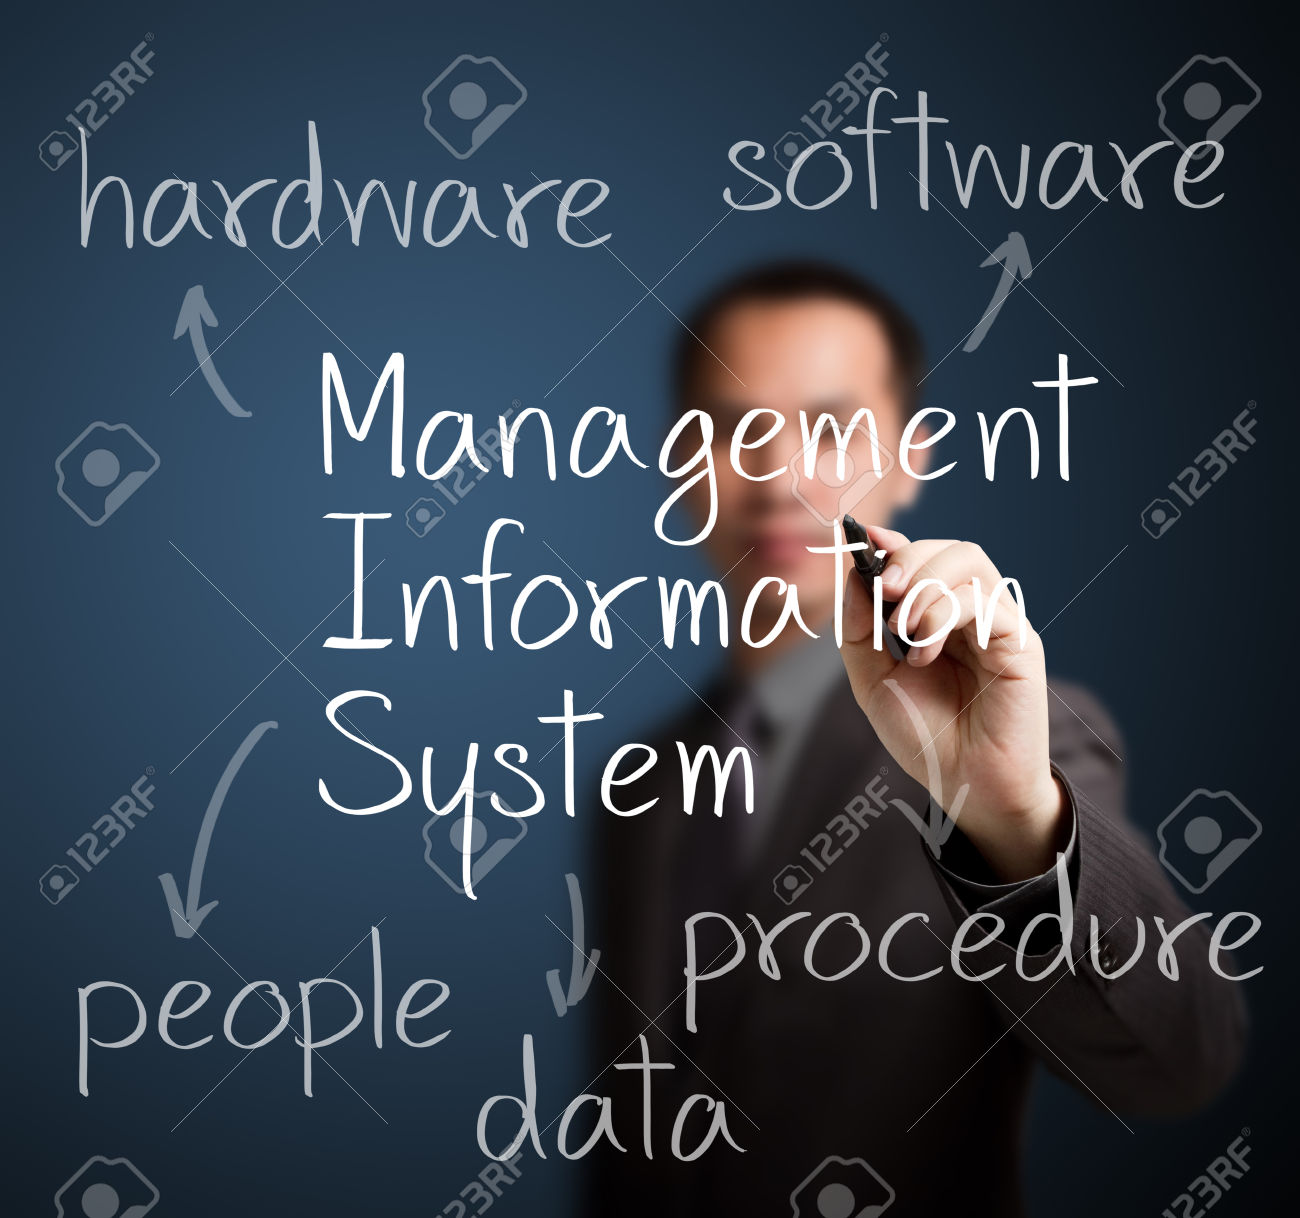 25233159-business-man-writing-management-information-system-concept-stock-photo.jpg